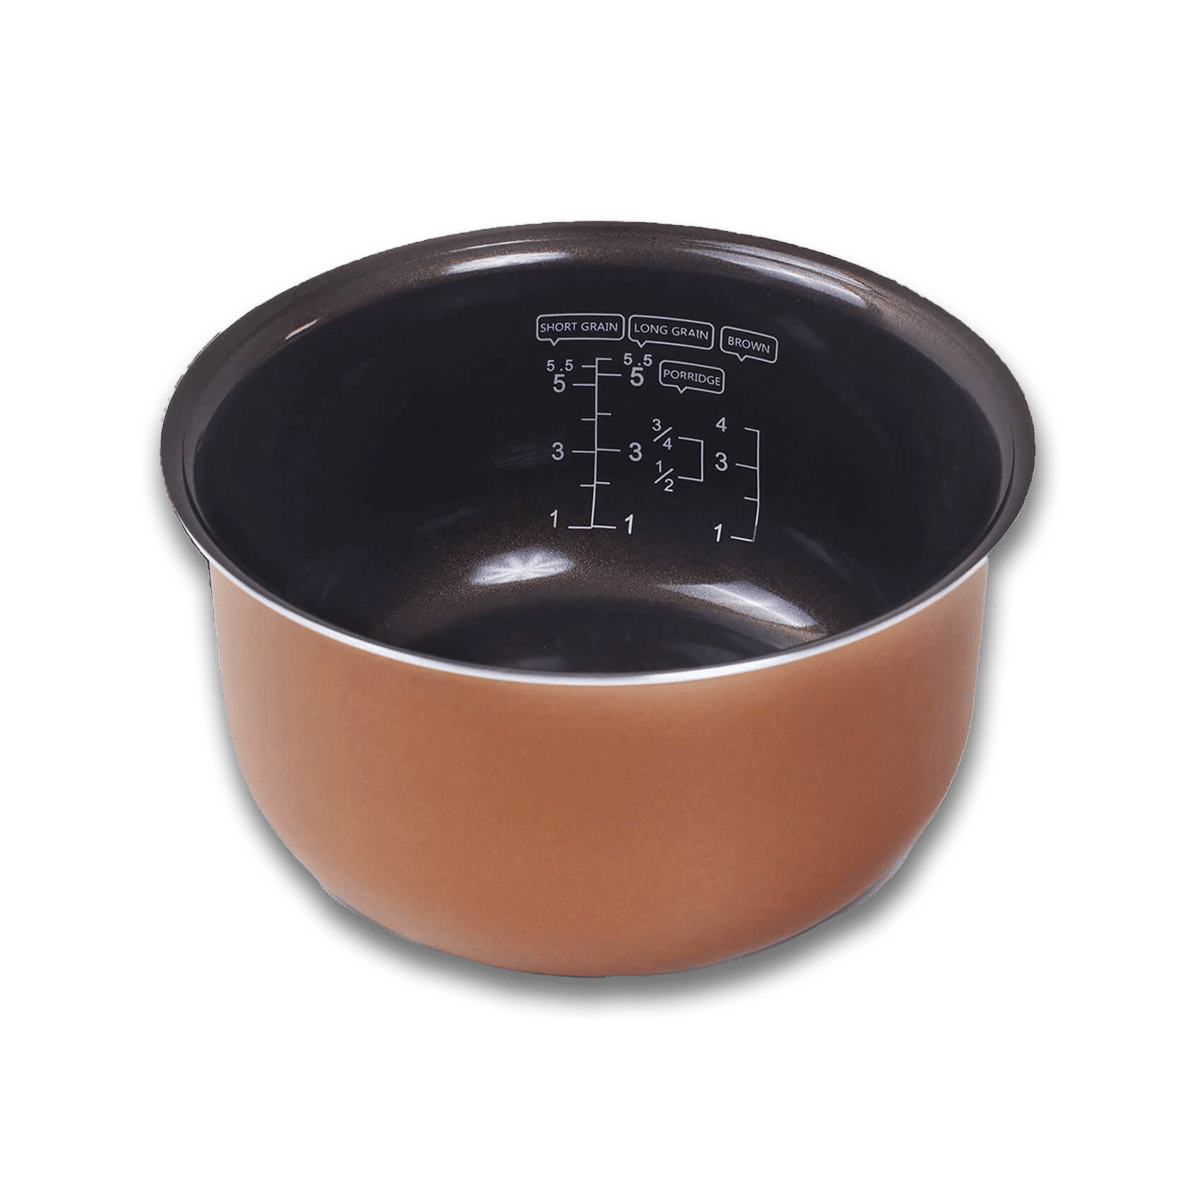 https://yum-asia.com/us/wp-content/uploads/sites/2/2022/06/Kumo-rice-cooker-inner-bowl.png